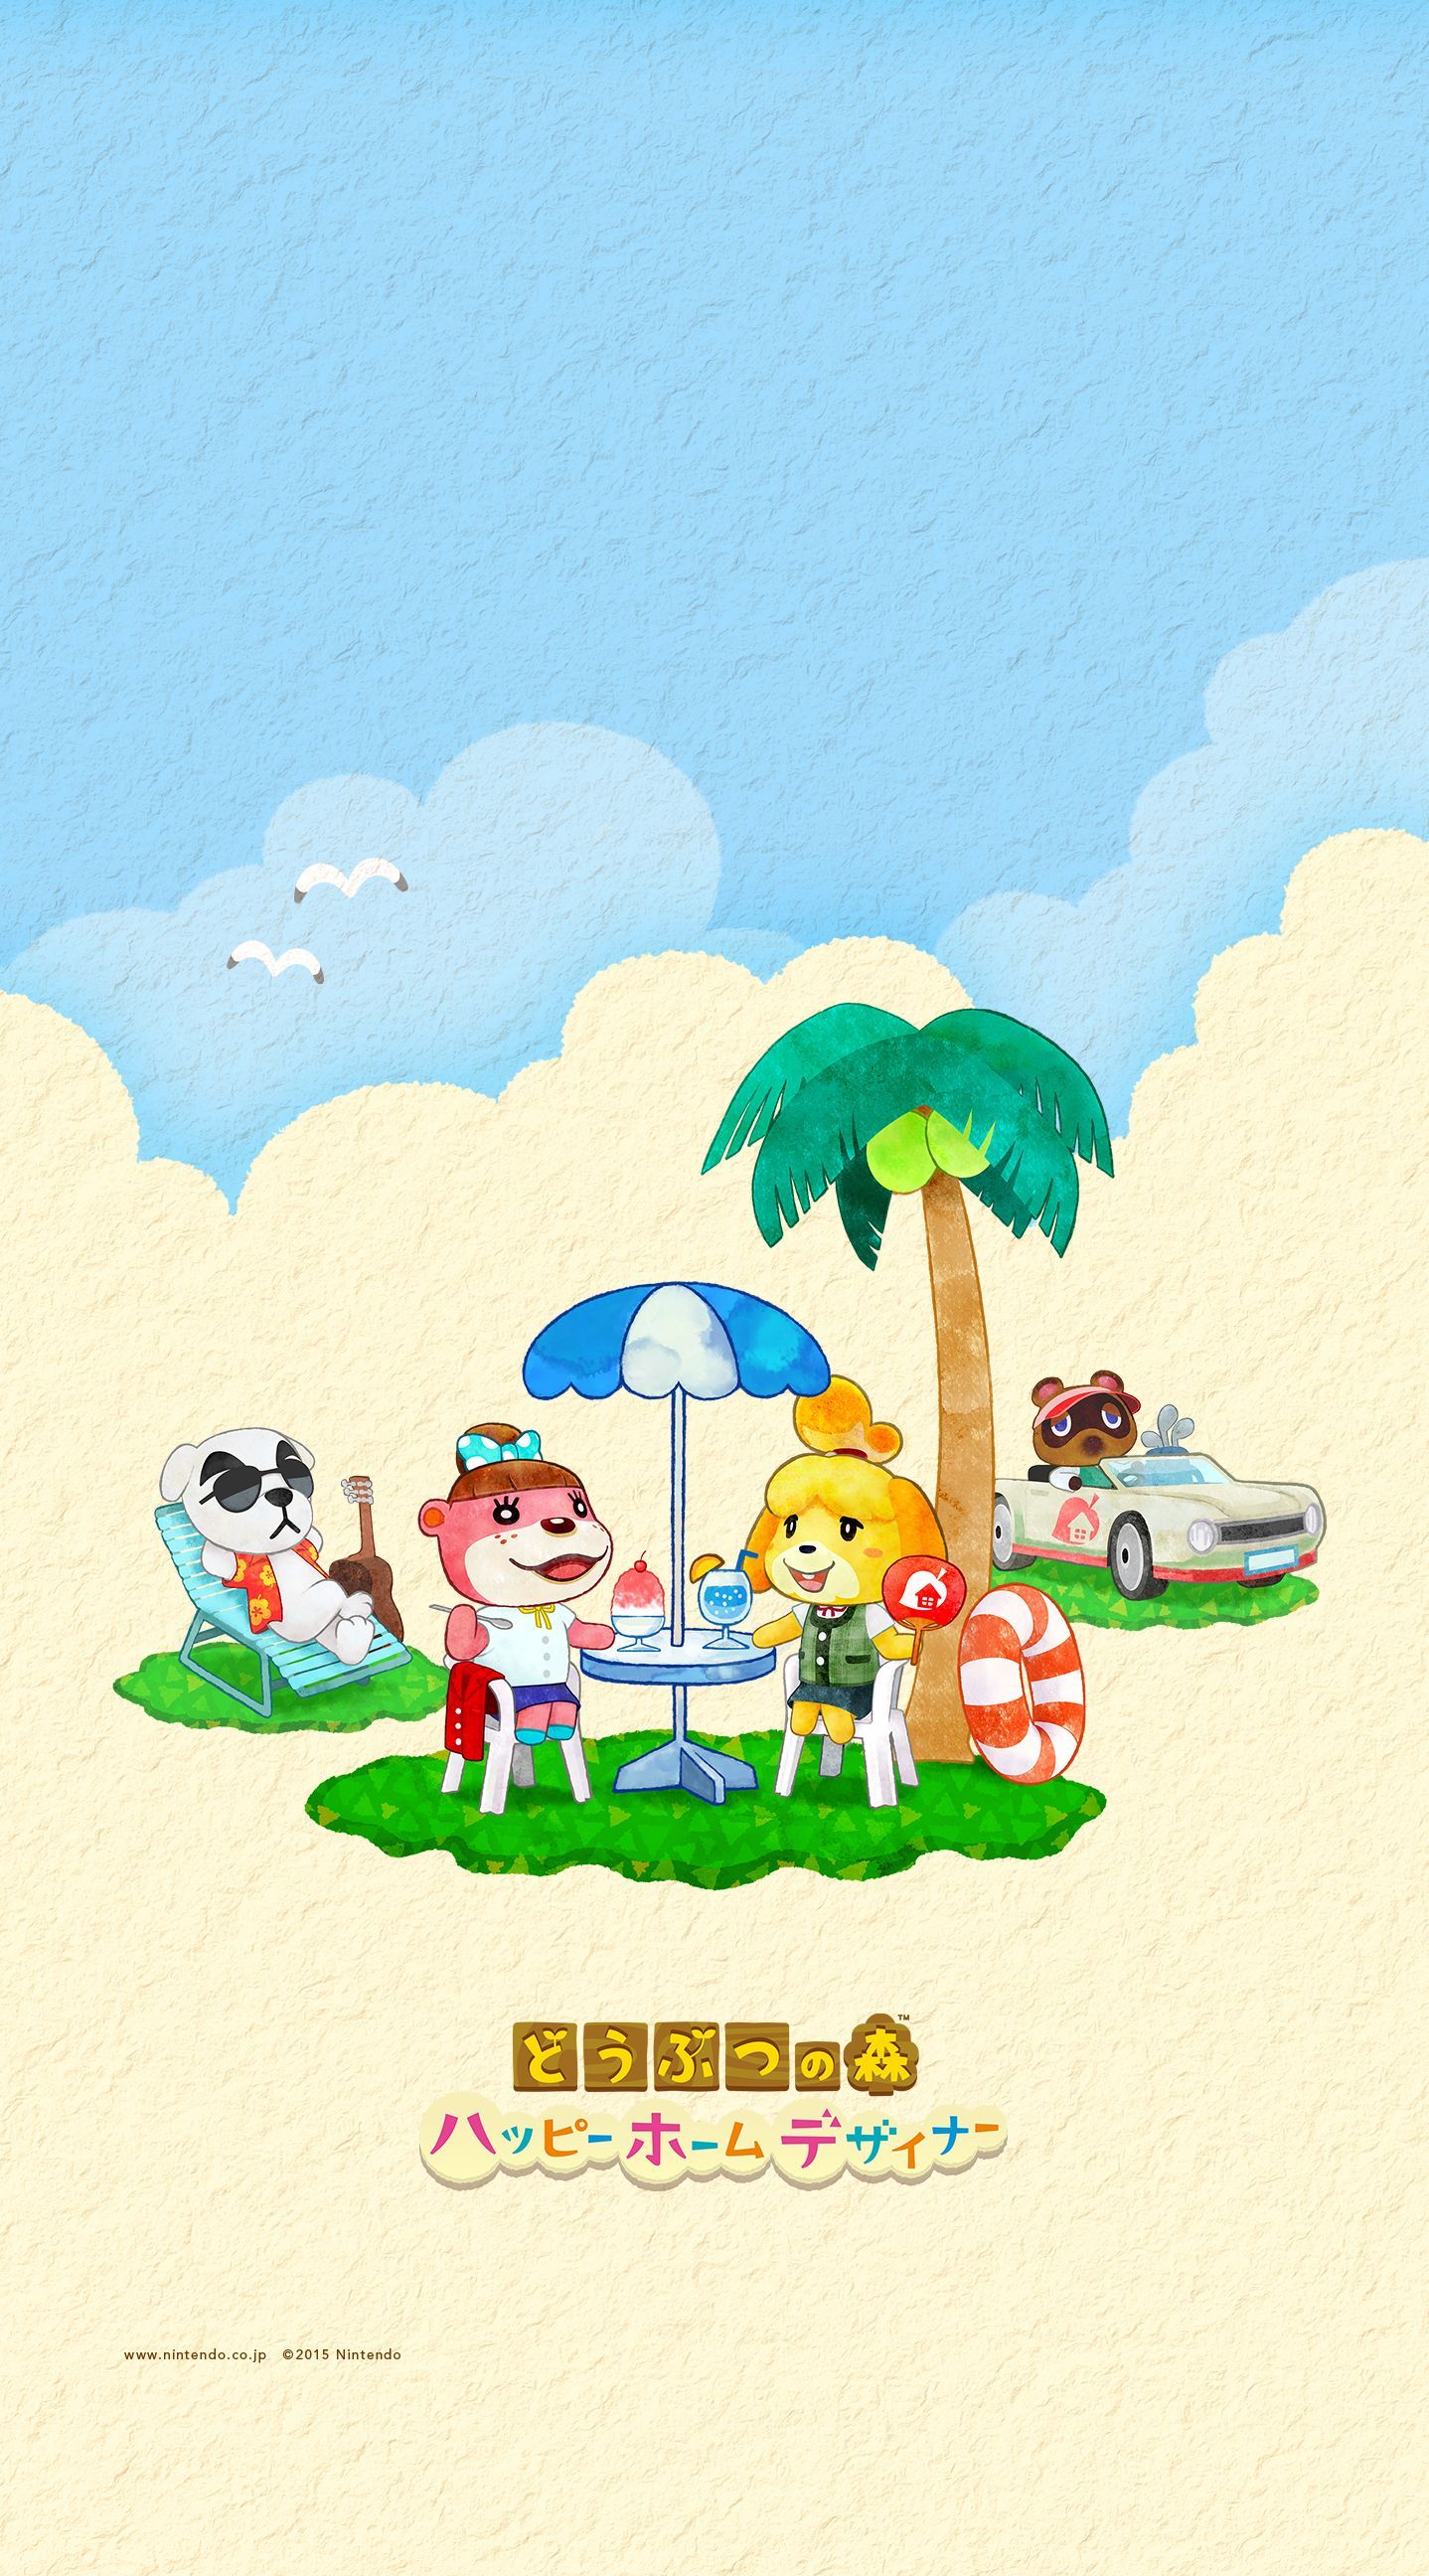 A cartoon of animals sitting at an outdoor table - Animal Crossing